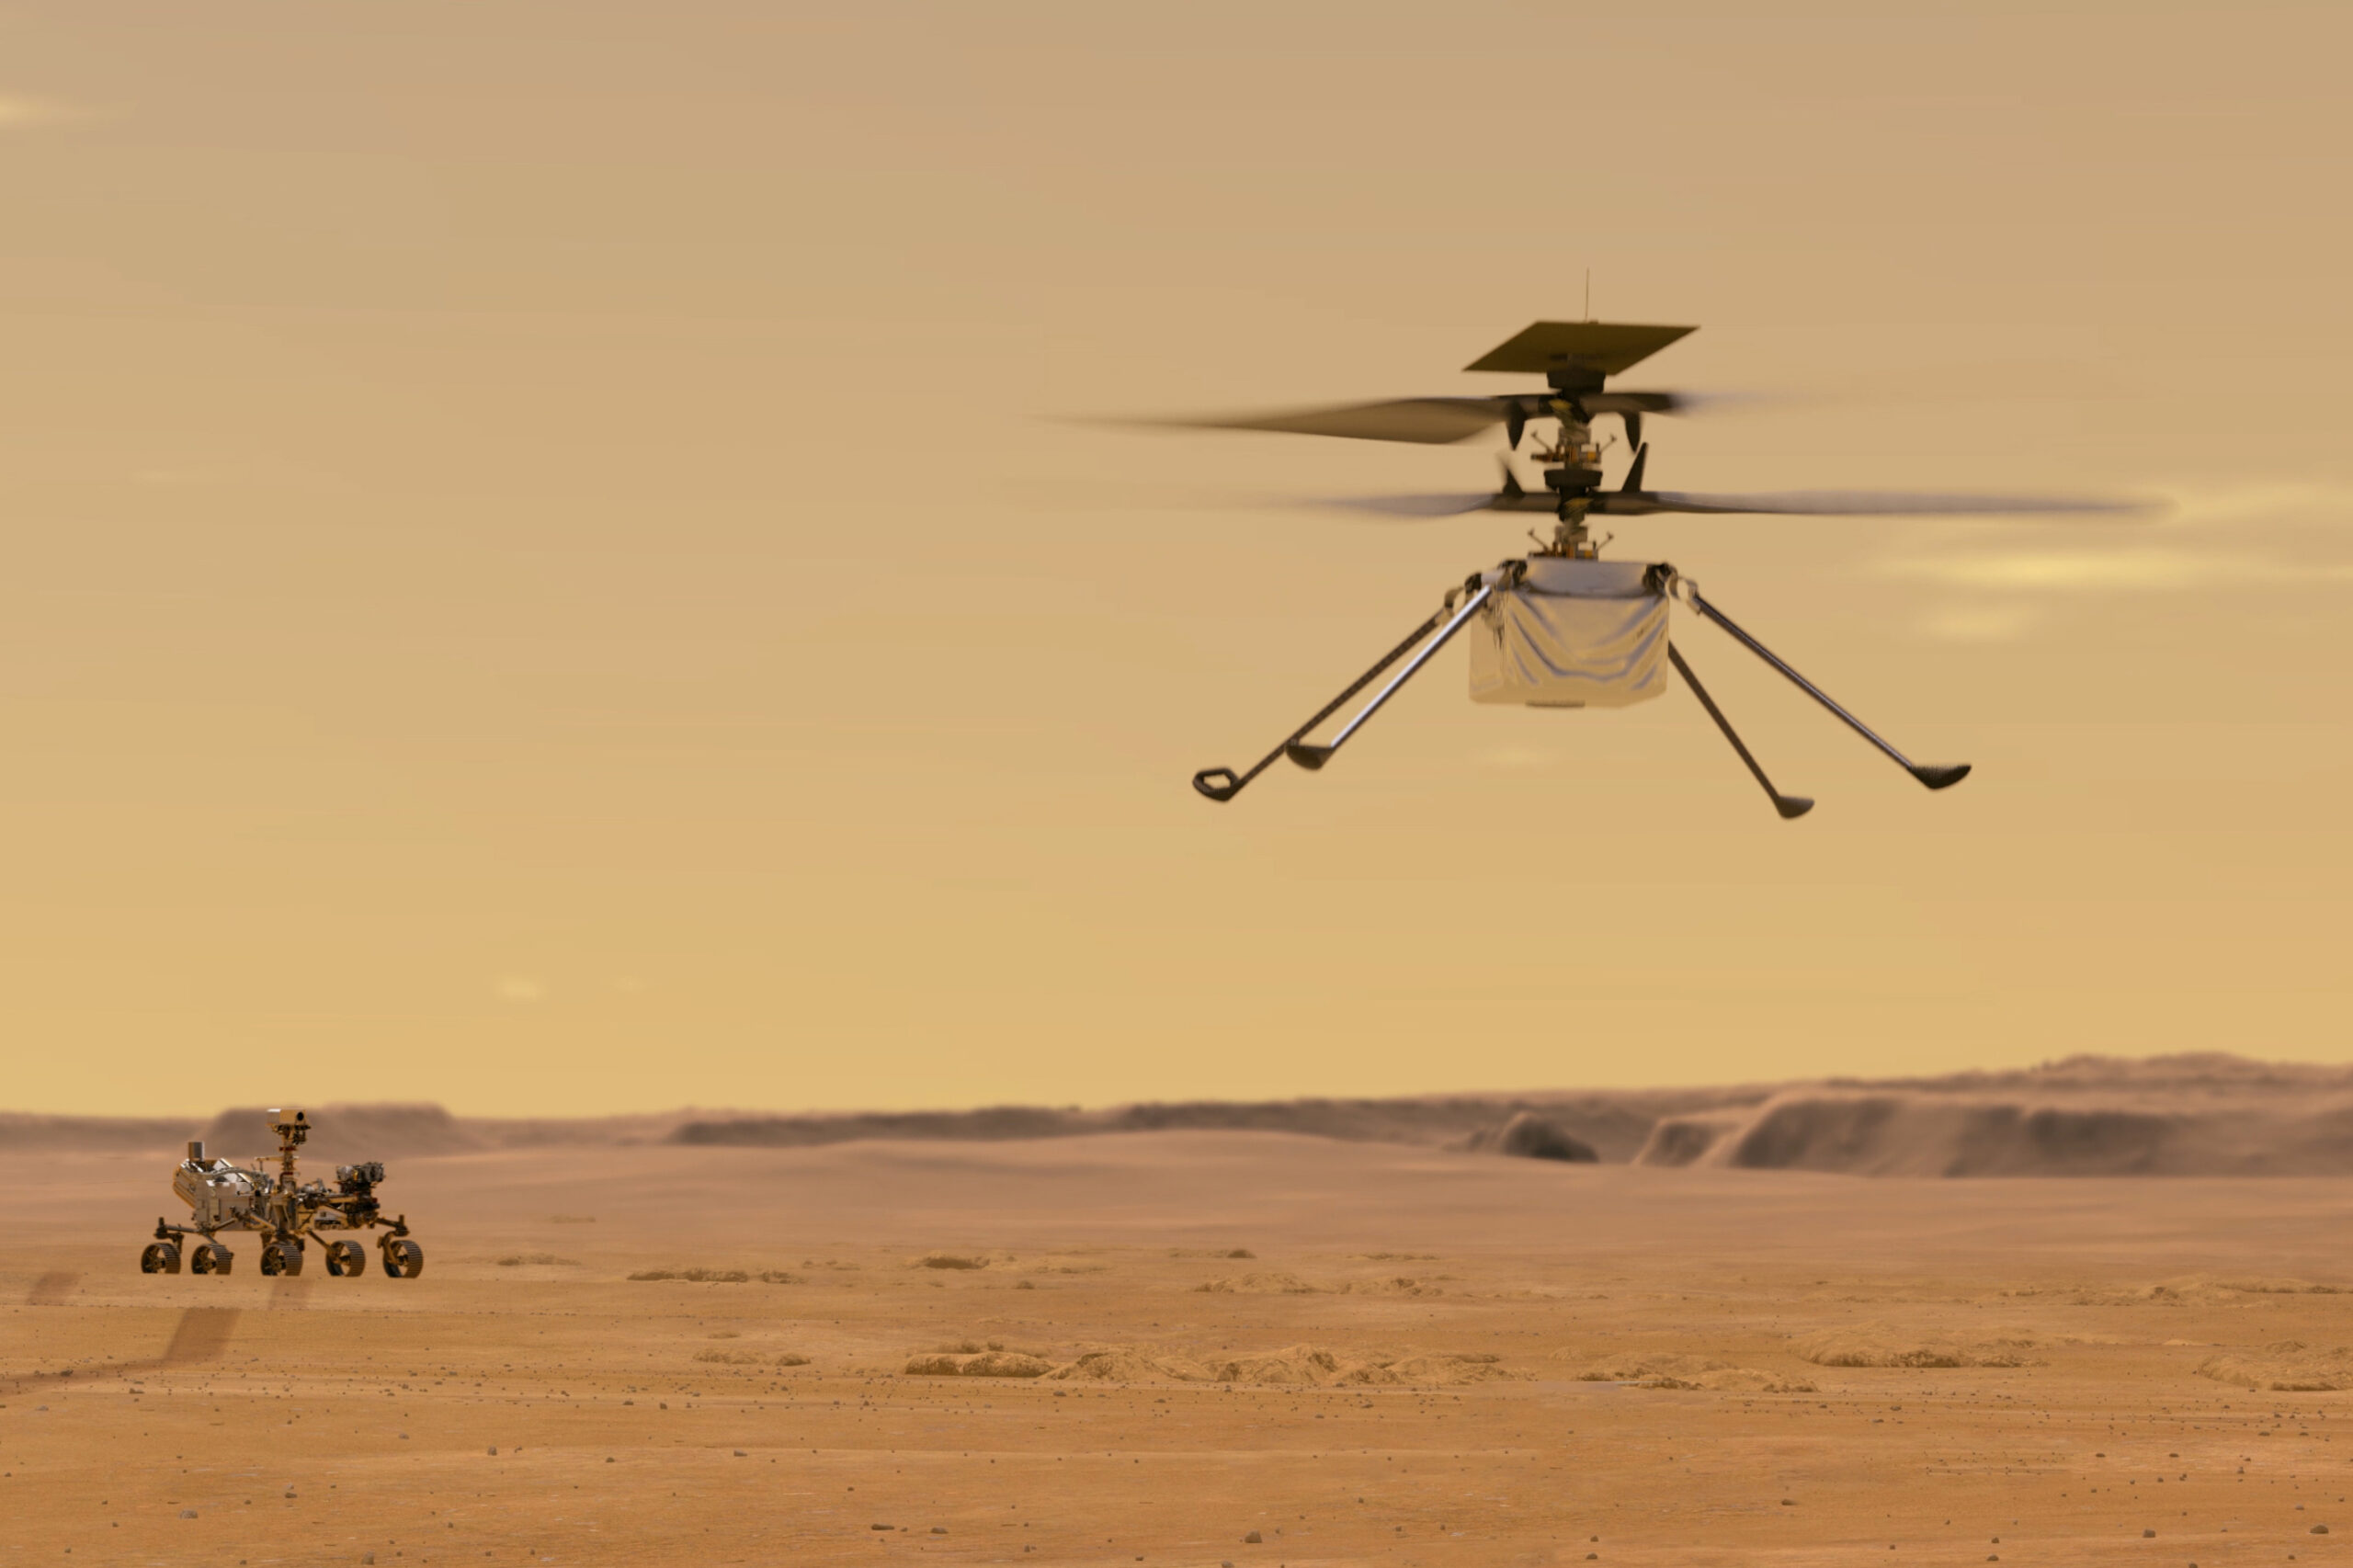 FILE - This illustration made available by NASA depicts the Ingenuity helicopter on Mars which was attached to the bottom of the Perseverance rover, background left. It will be the first aircraft to attempt controlled flight on another planet. (NASA/JPL-Caltech via AP)